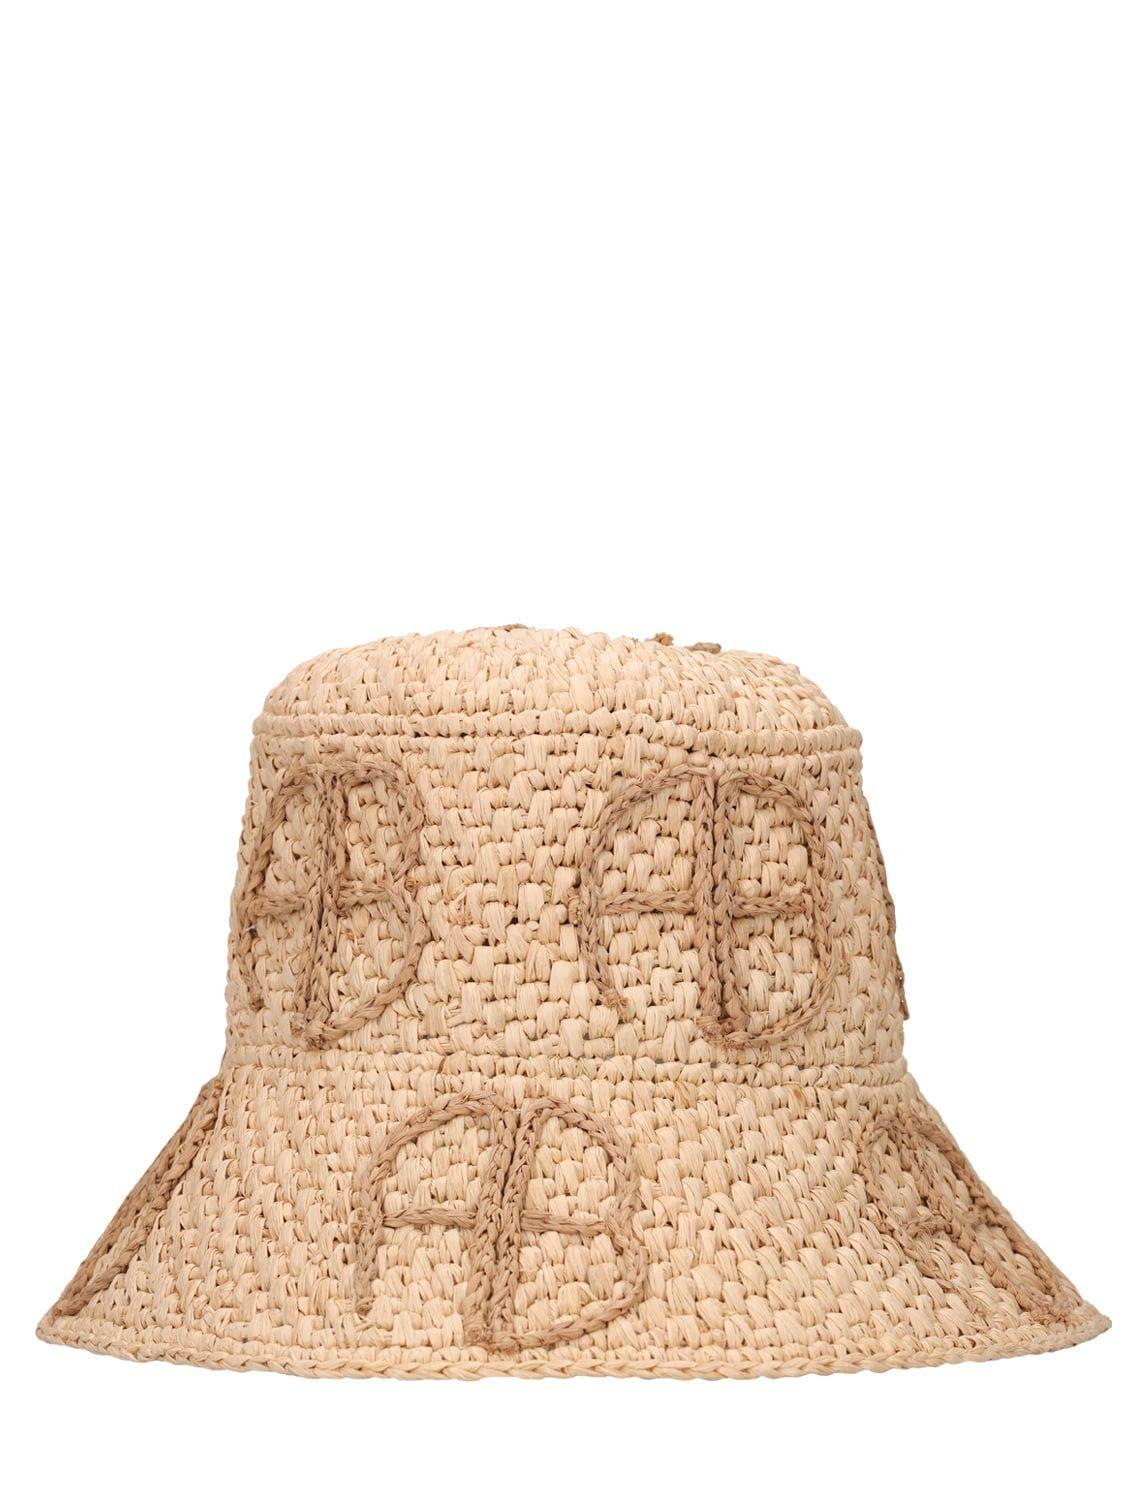 Anine Bing Ab Cabana Bucket Hat in Natural | Lyst